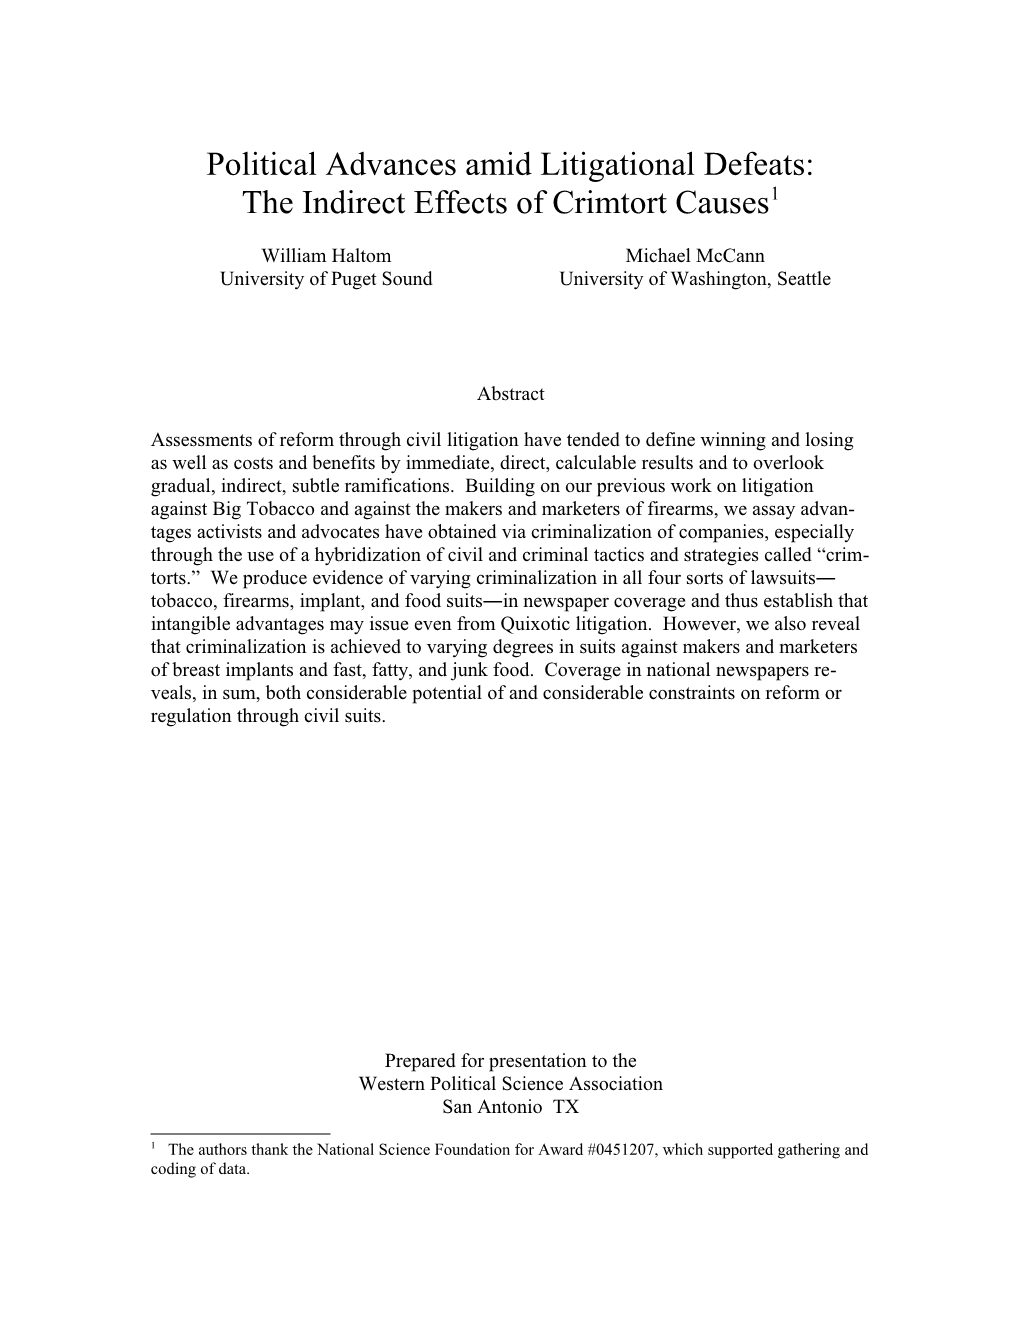 Political Advances Amid Litigational Defeats: the Indirect Effects of Crimtort Causes